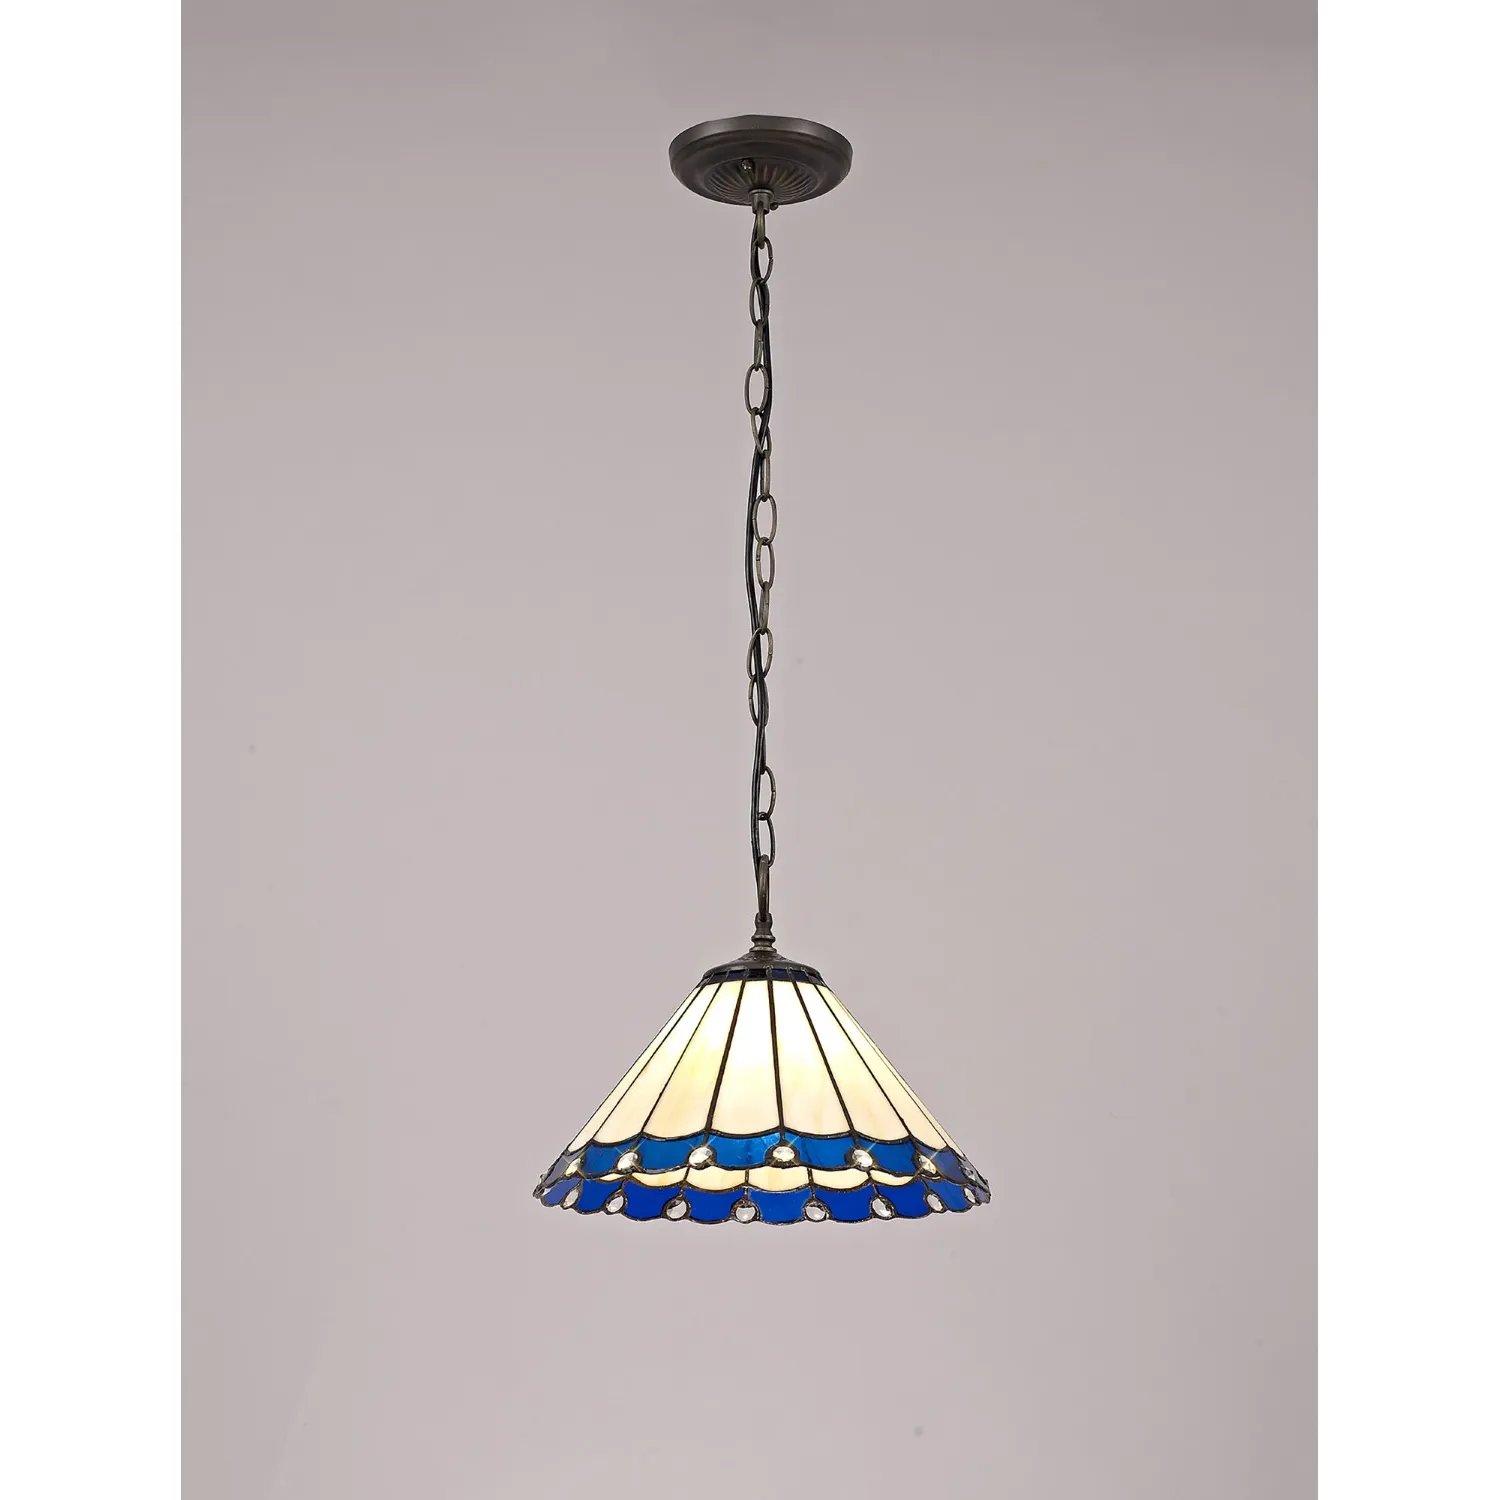 Ware 1 Light Downlighter Pendant E27 With 30cm Tiffany Shade, Blue Cream Crystal Aged Antique Brass